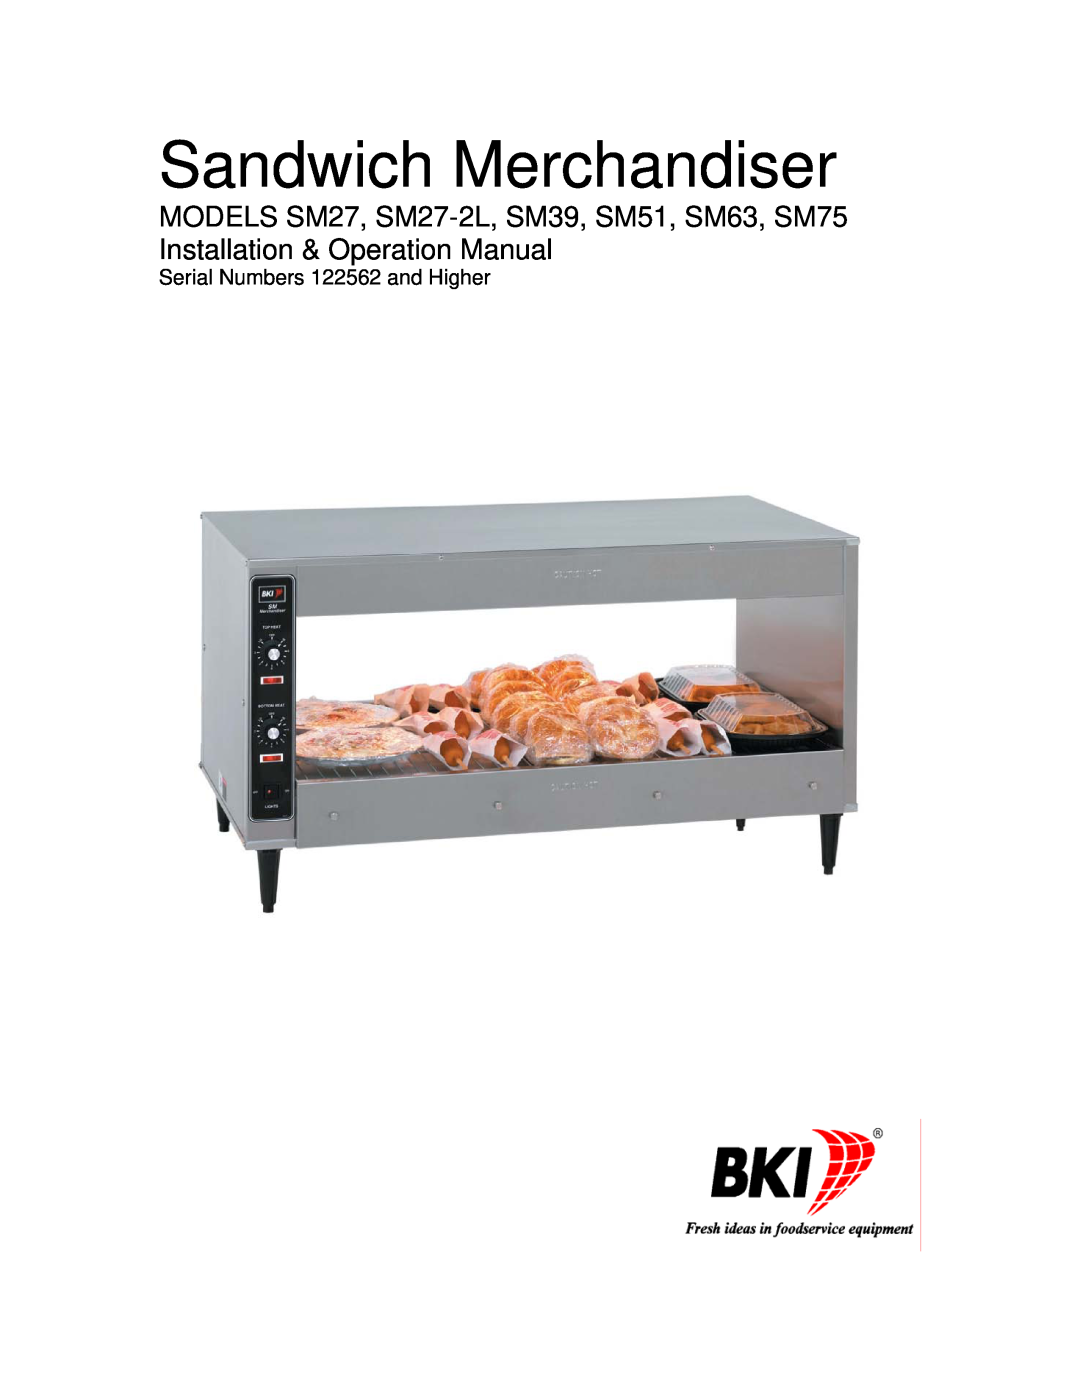 Bakers Pride Oven SM63, SM75, SM27-2L, SM51, SM39 operation manual Sandwich Merchandiser, Serial Numbers 122562 and Higher 